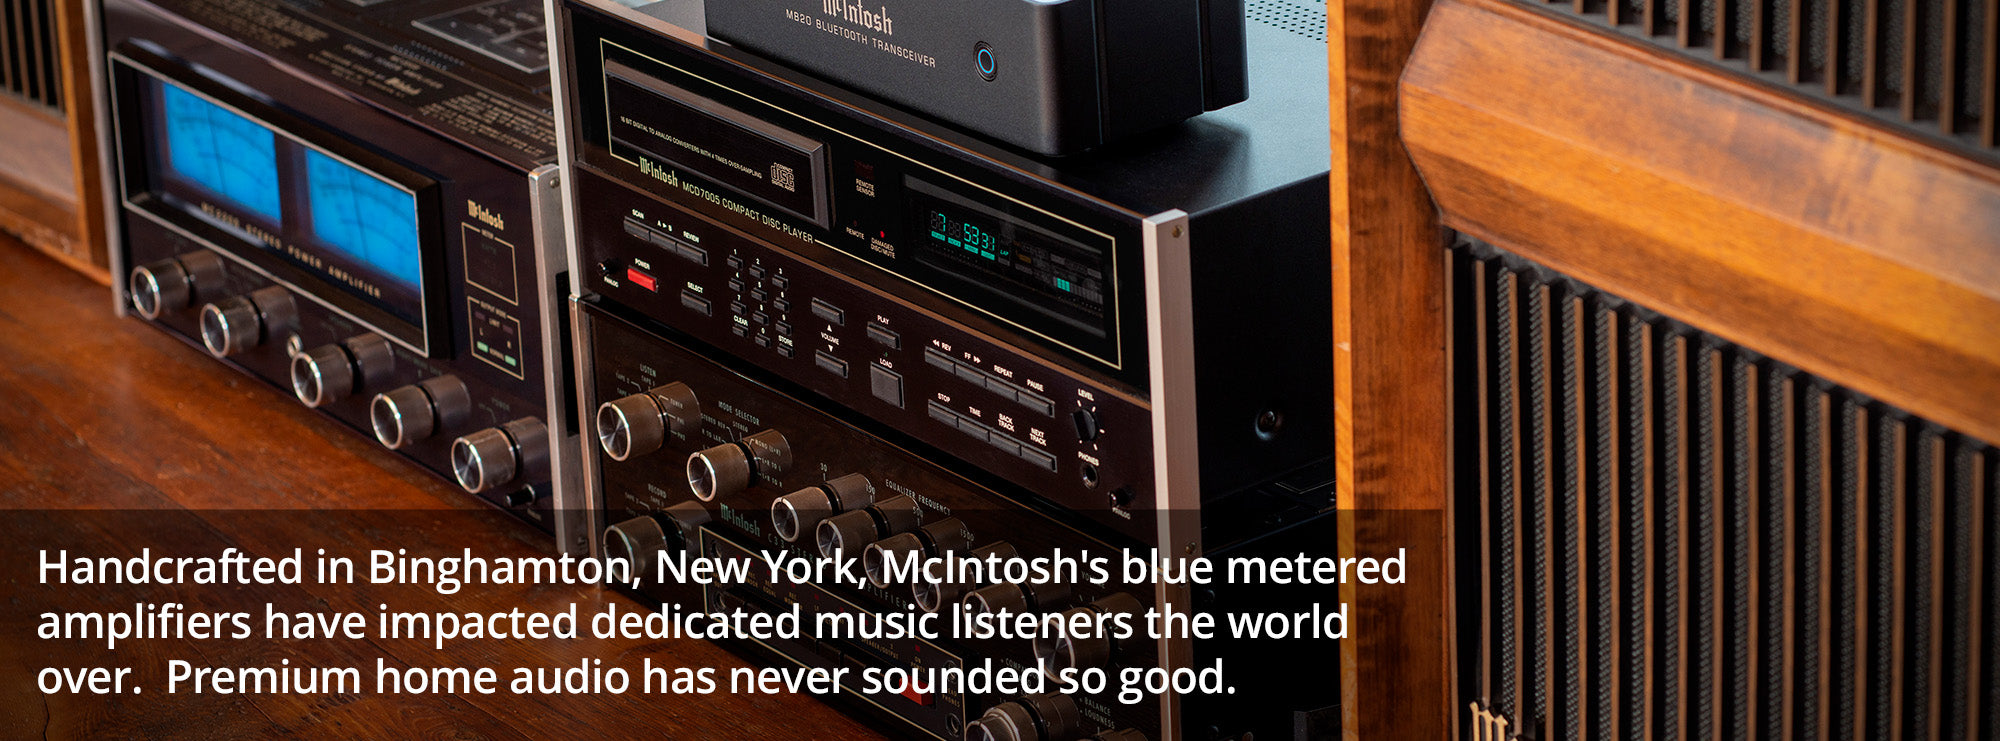 Handcrafted in Binghamton, New York, McIntosh's blue metered amplifiers have impacted dedicated music listeners the world over.  Premium home audio has never sounded so good.